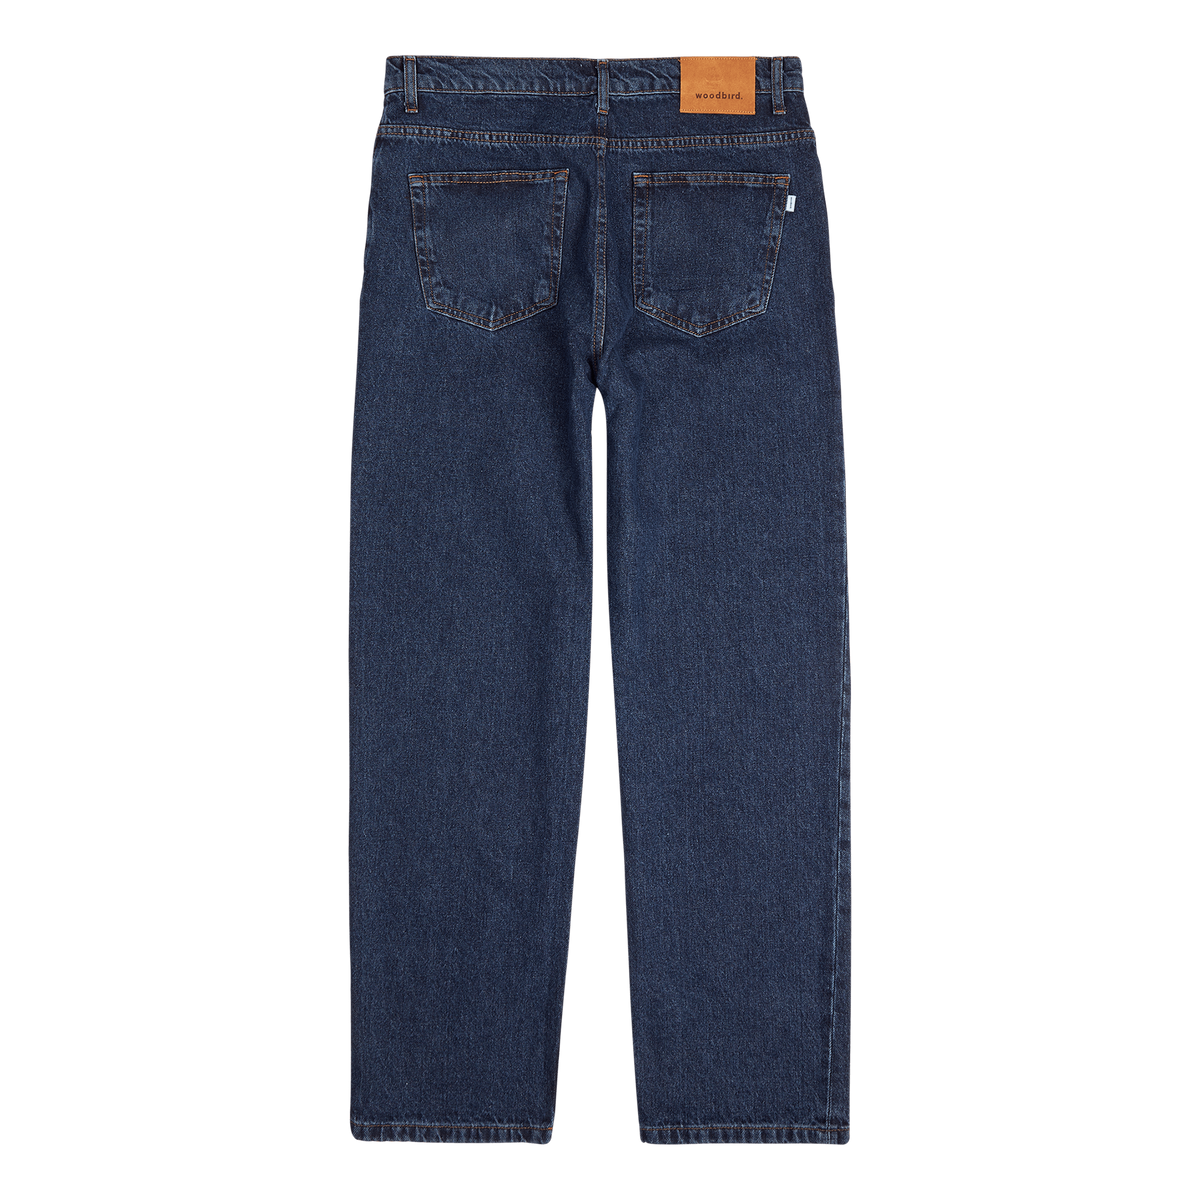 Leroy 90s Rinse Jeans 561